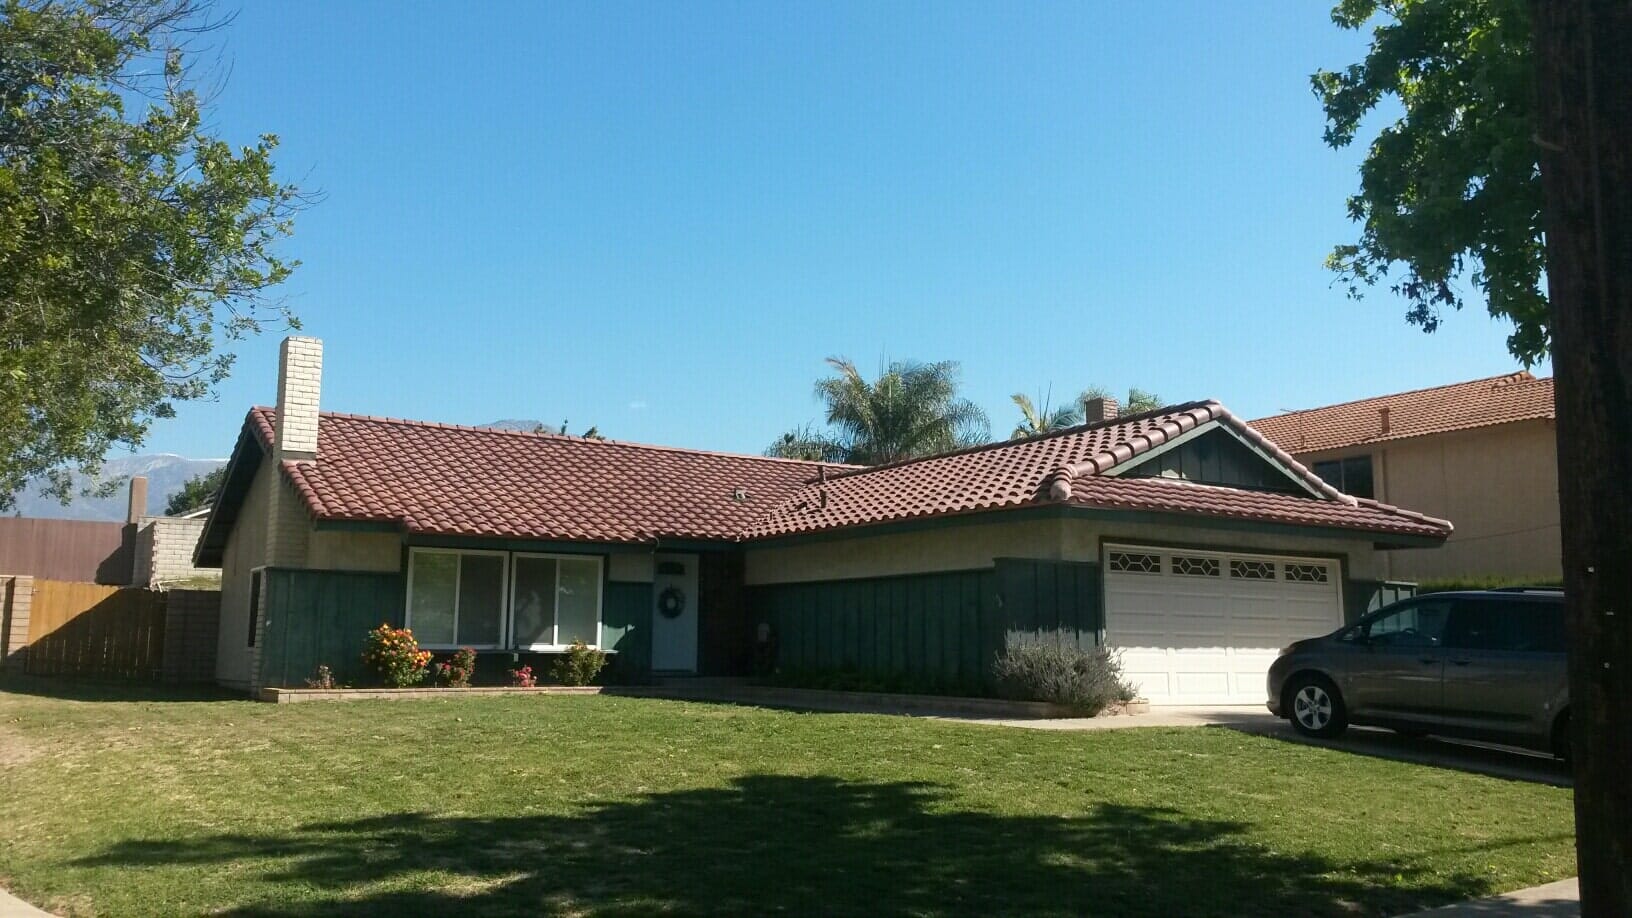 Full service roofing — Roofing Company in Alta Loma, CA